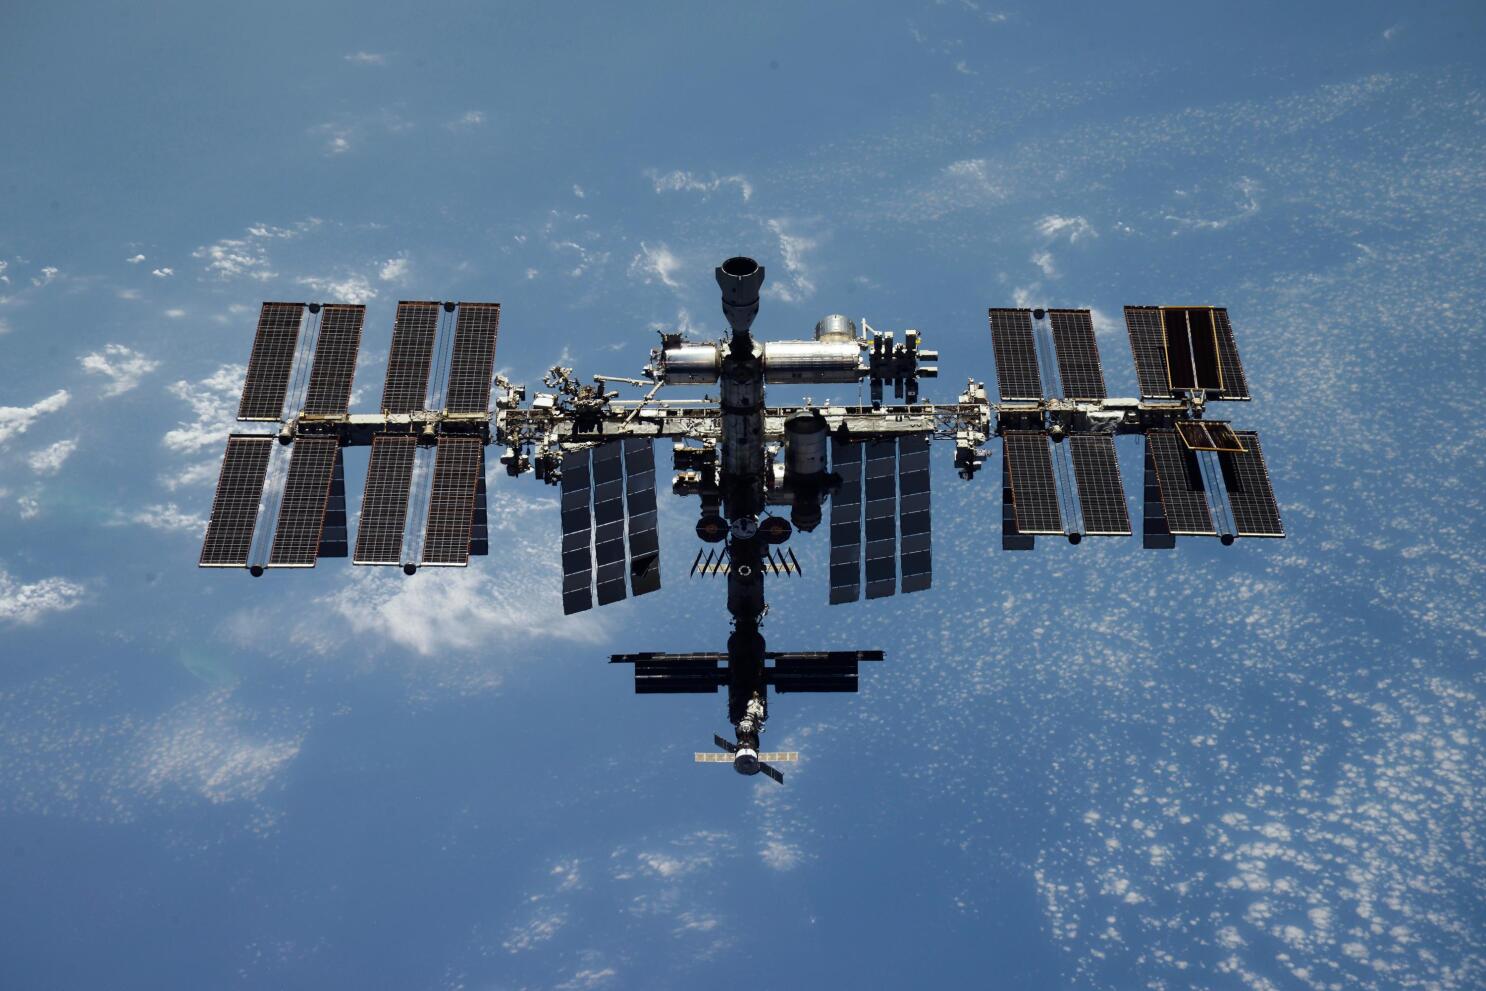 Social media posts falsely claim space station footage is faked